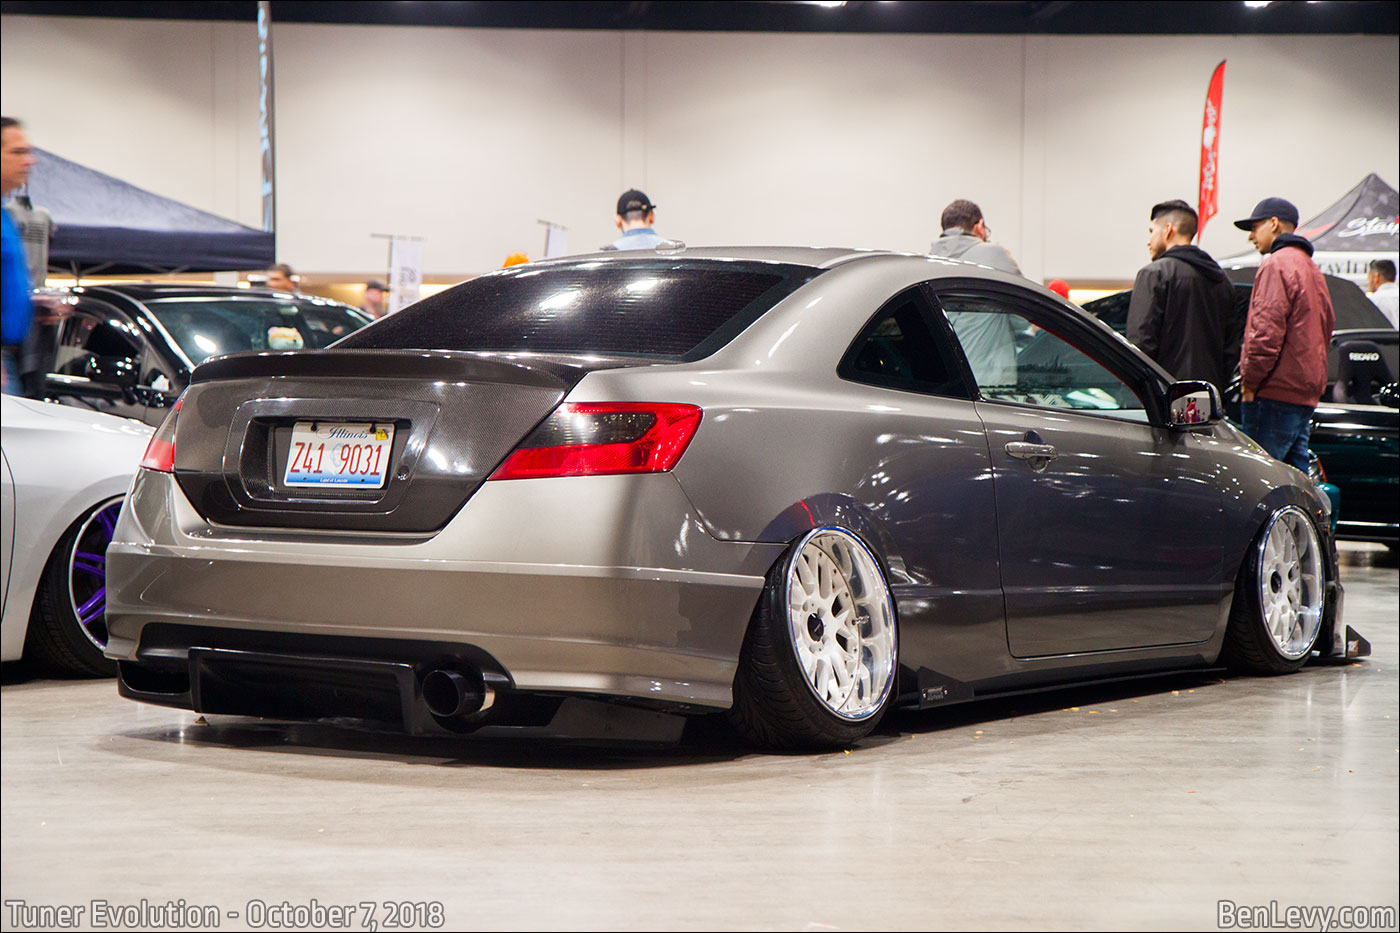 Civic coupe with carbon fiber trunklid